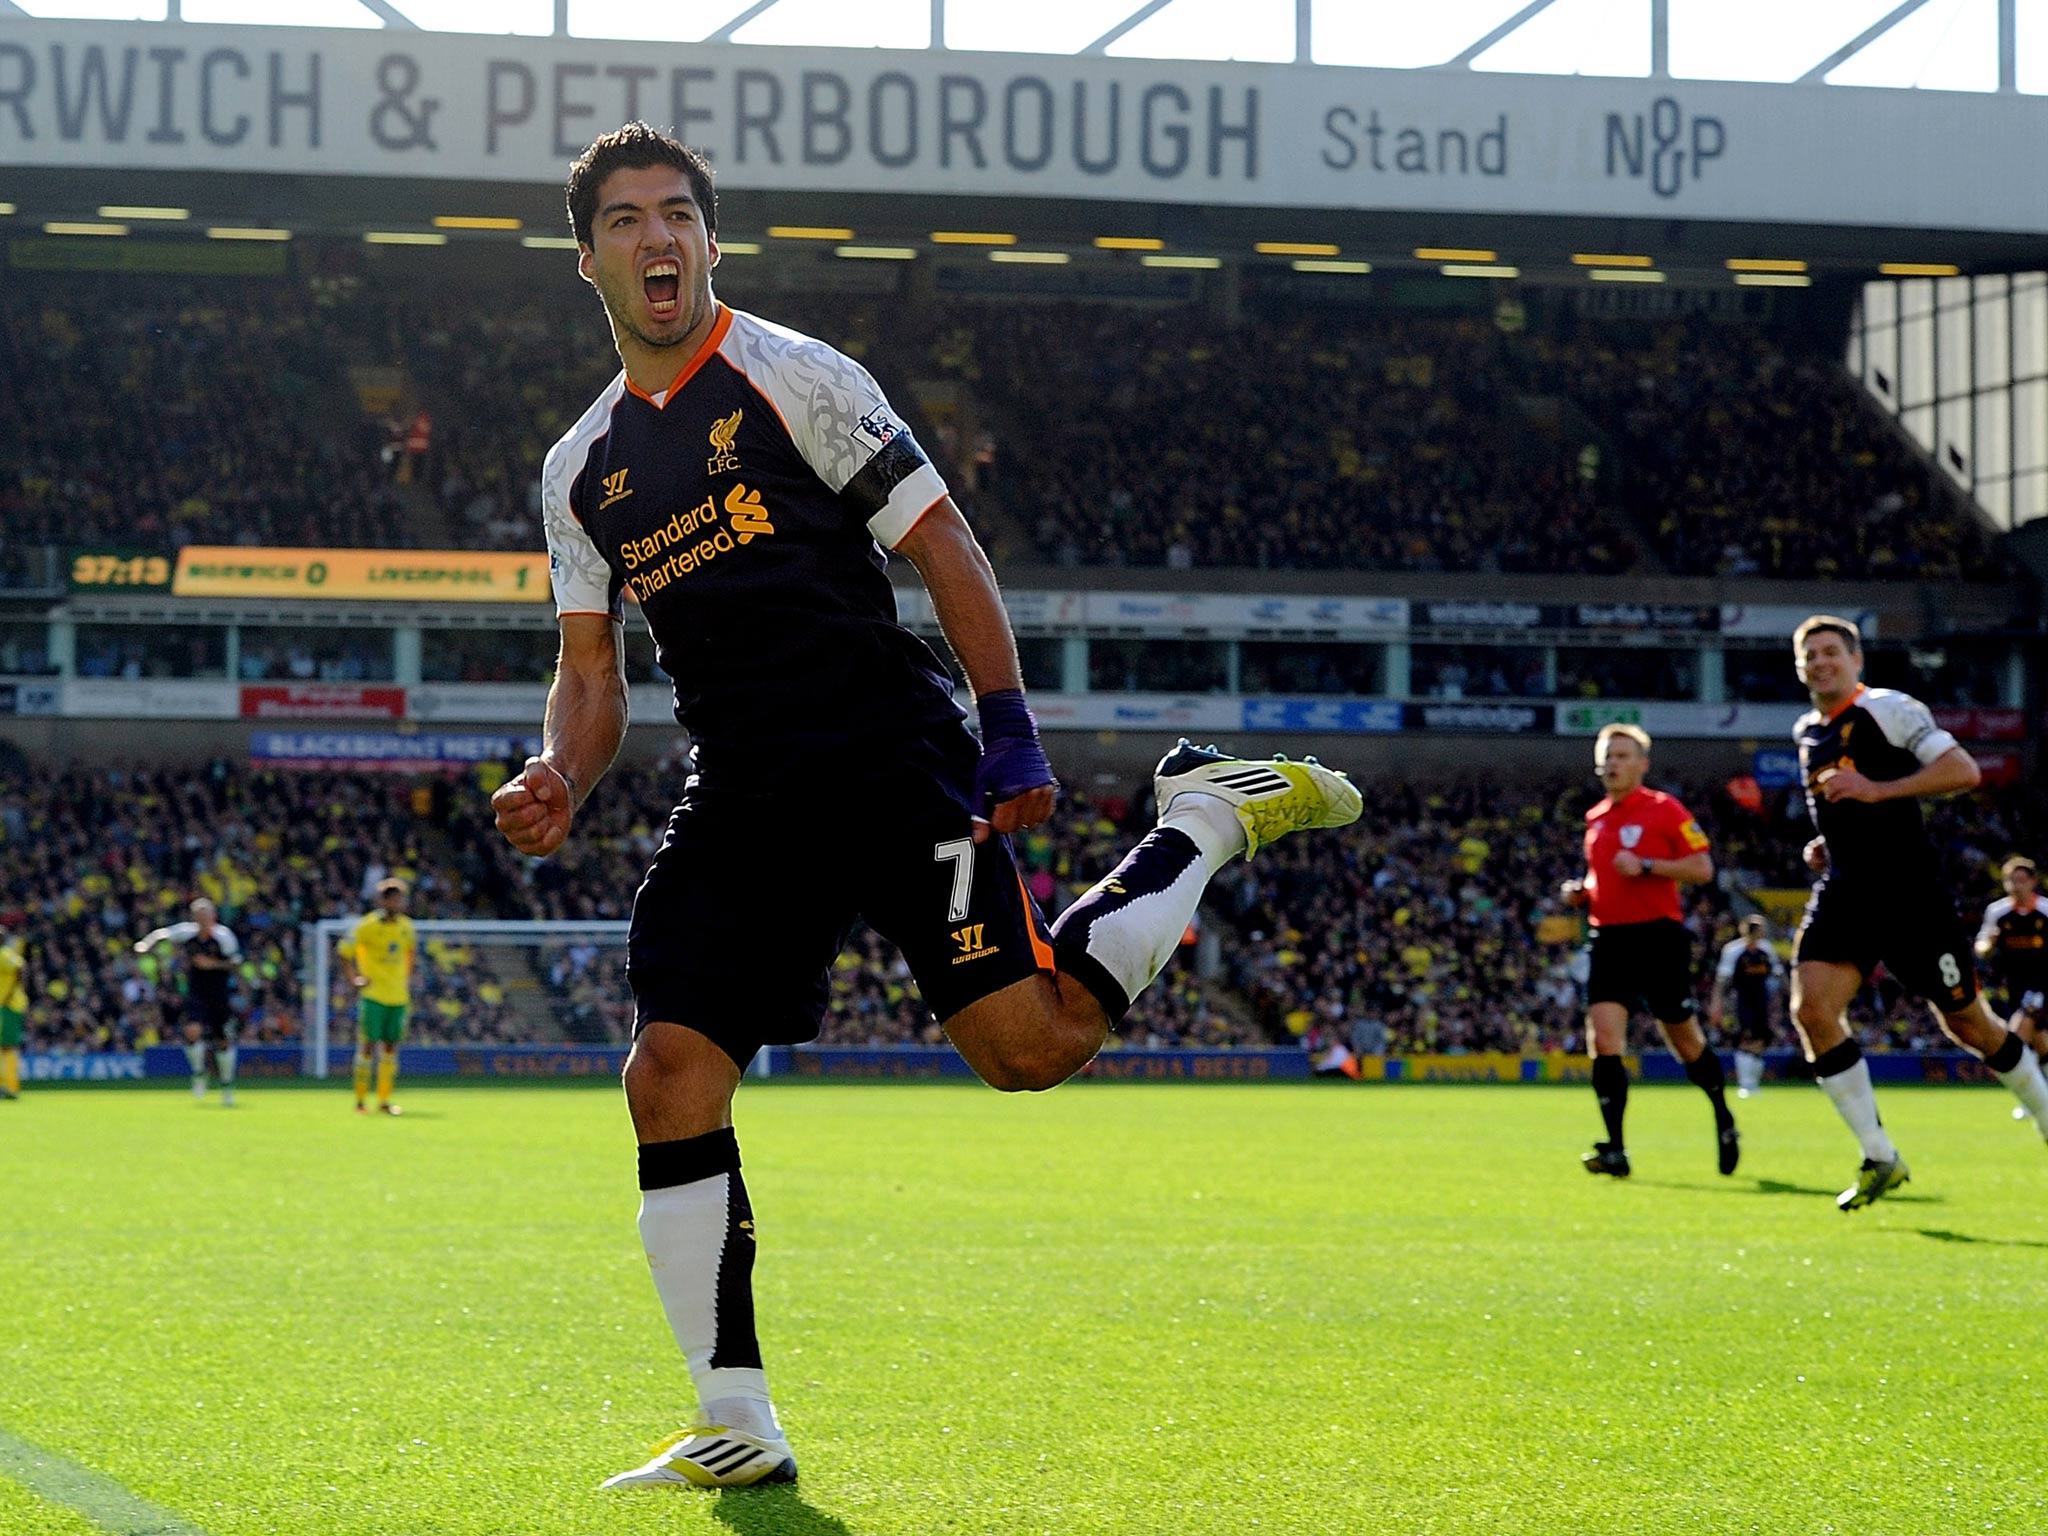 Suarez scores a stunning hat-trick as Liverpool thrash Norwich 5-2 at Carrow Road.